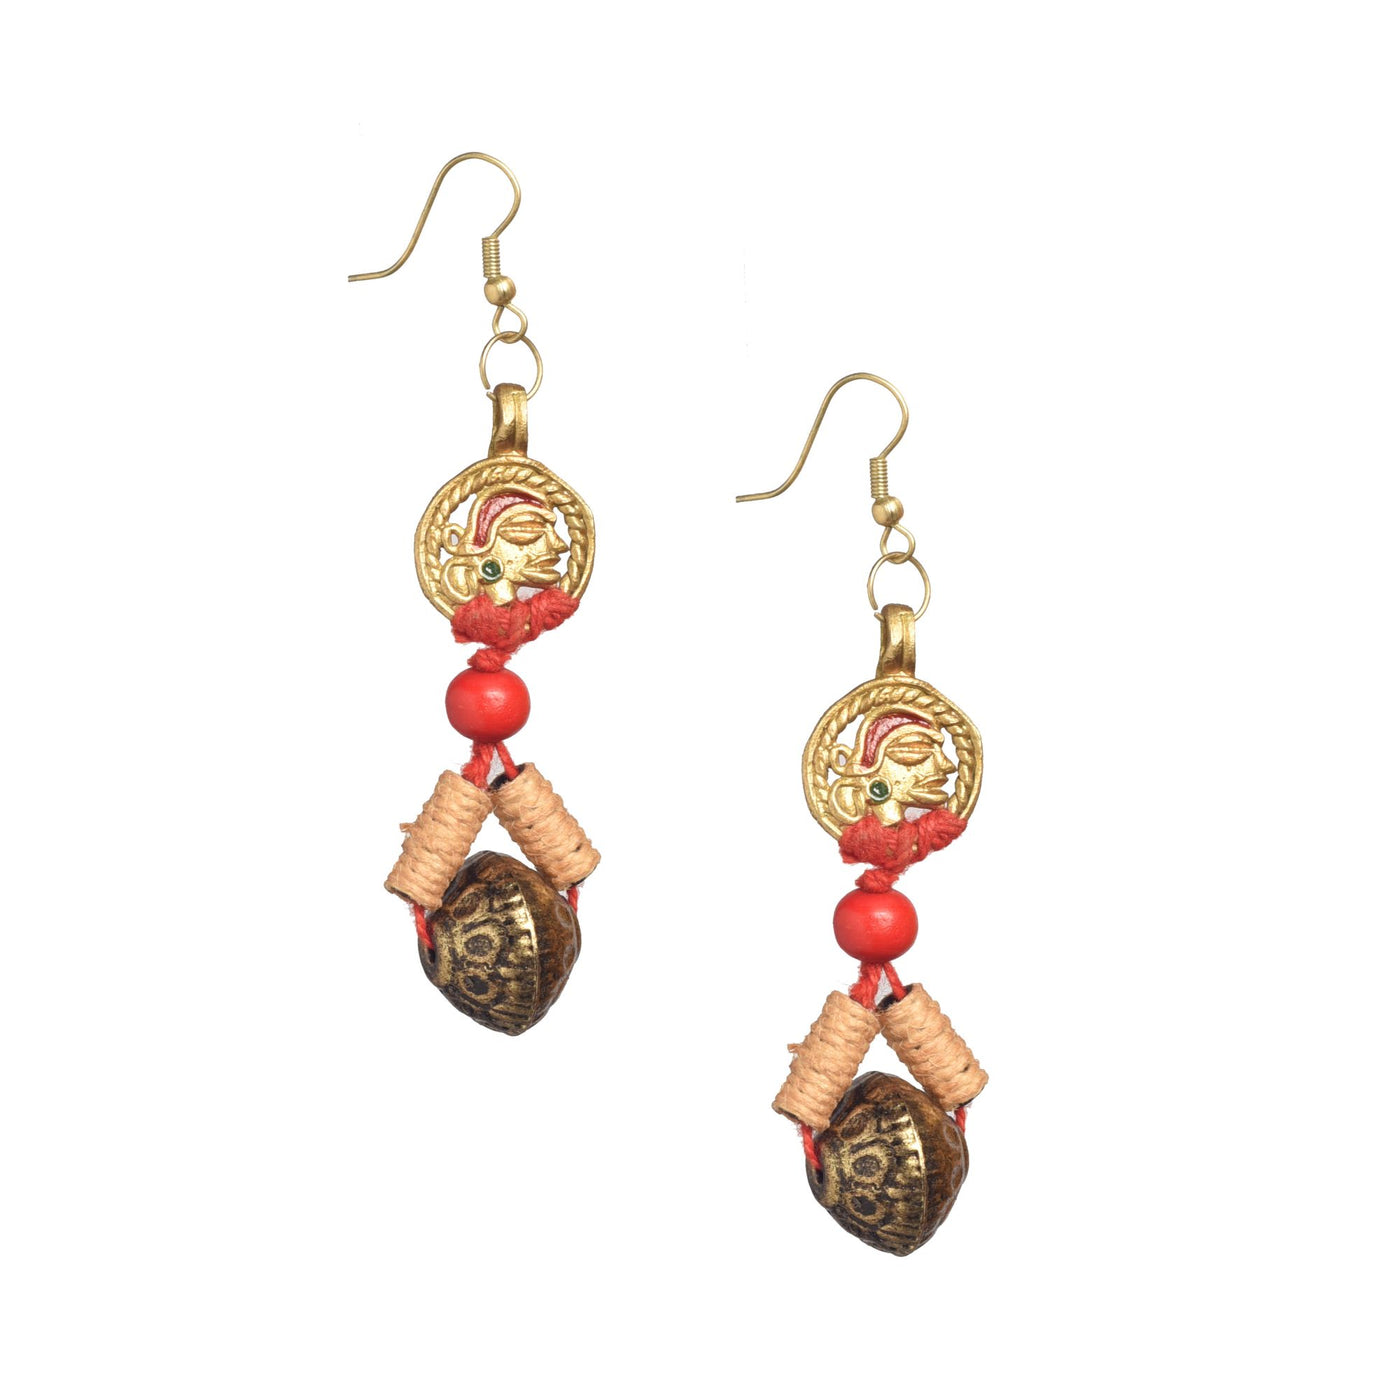 The Queen Noble Handcrafted Tribal Earrings - Fashion & Lifestyle - 5